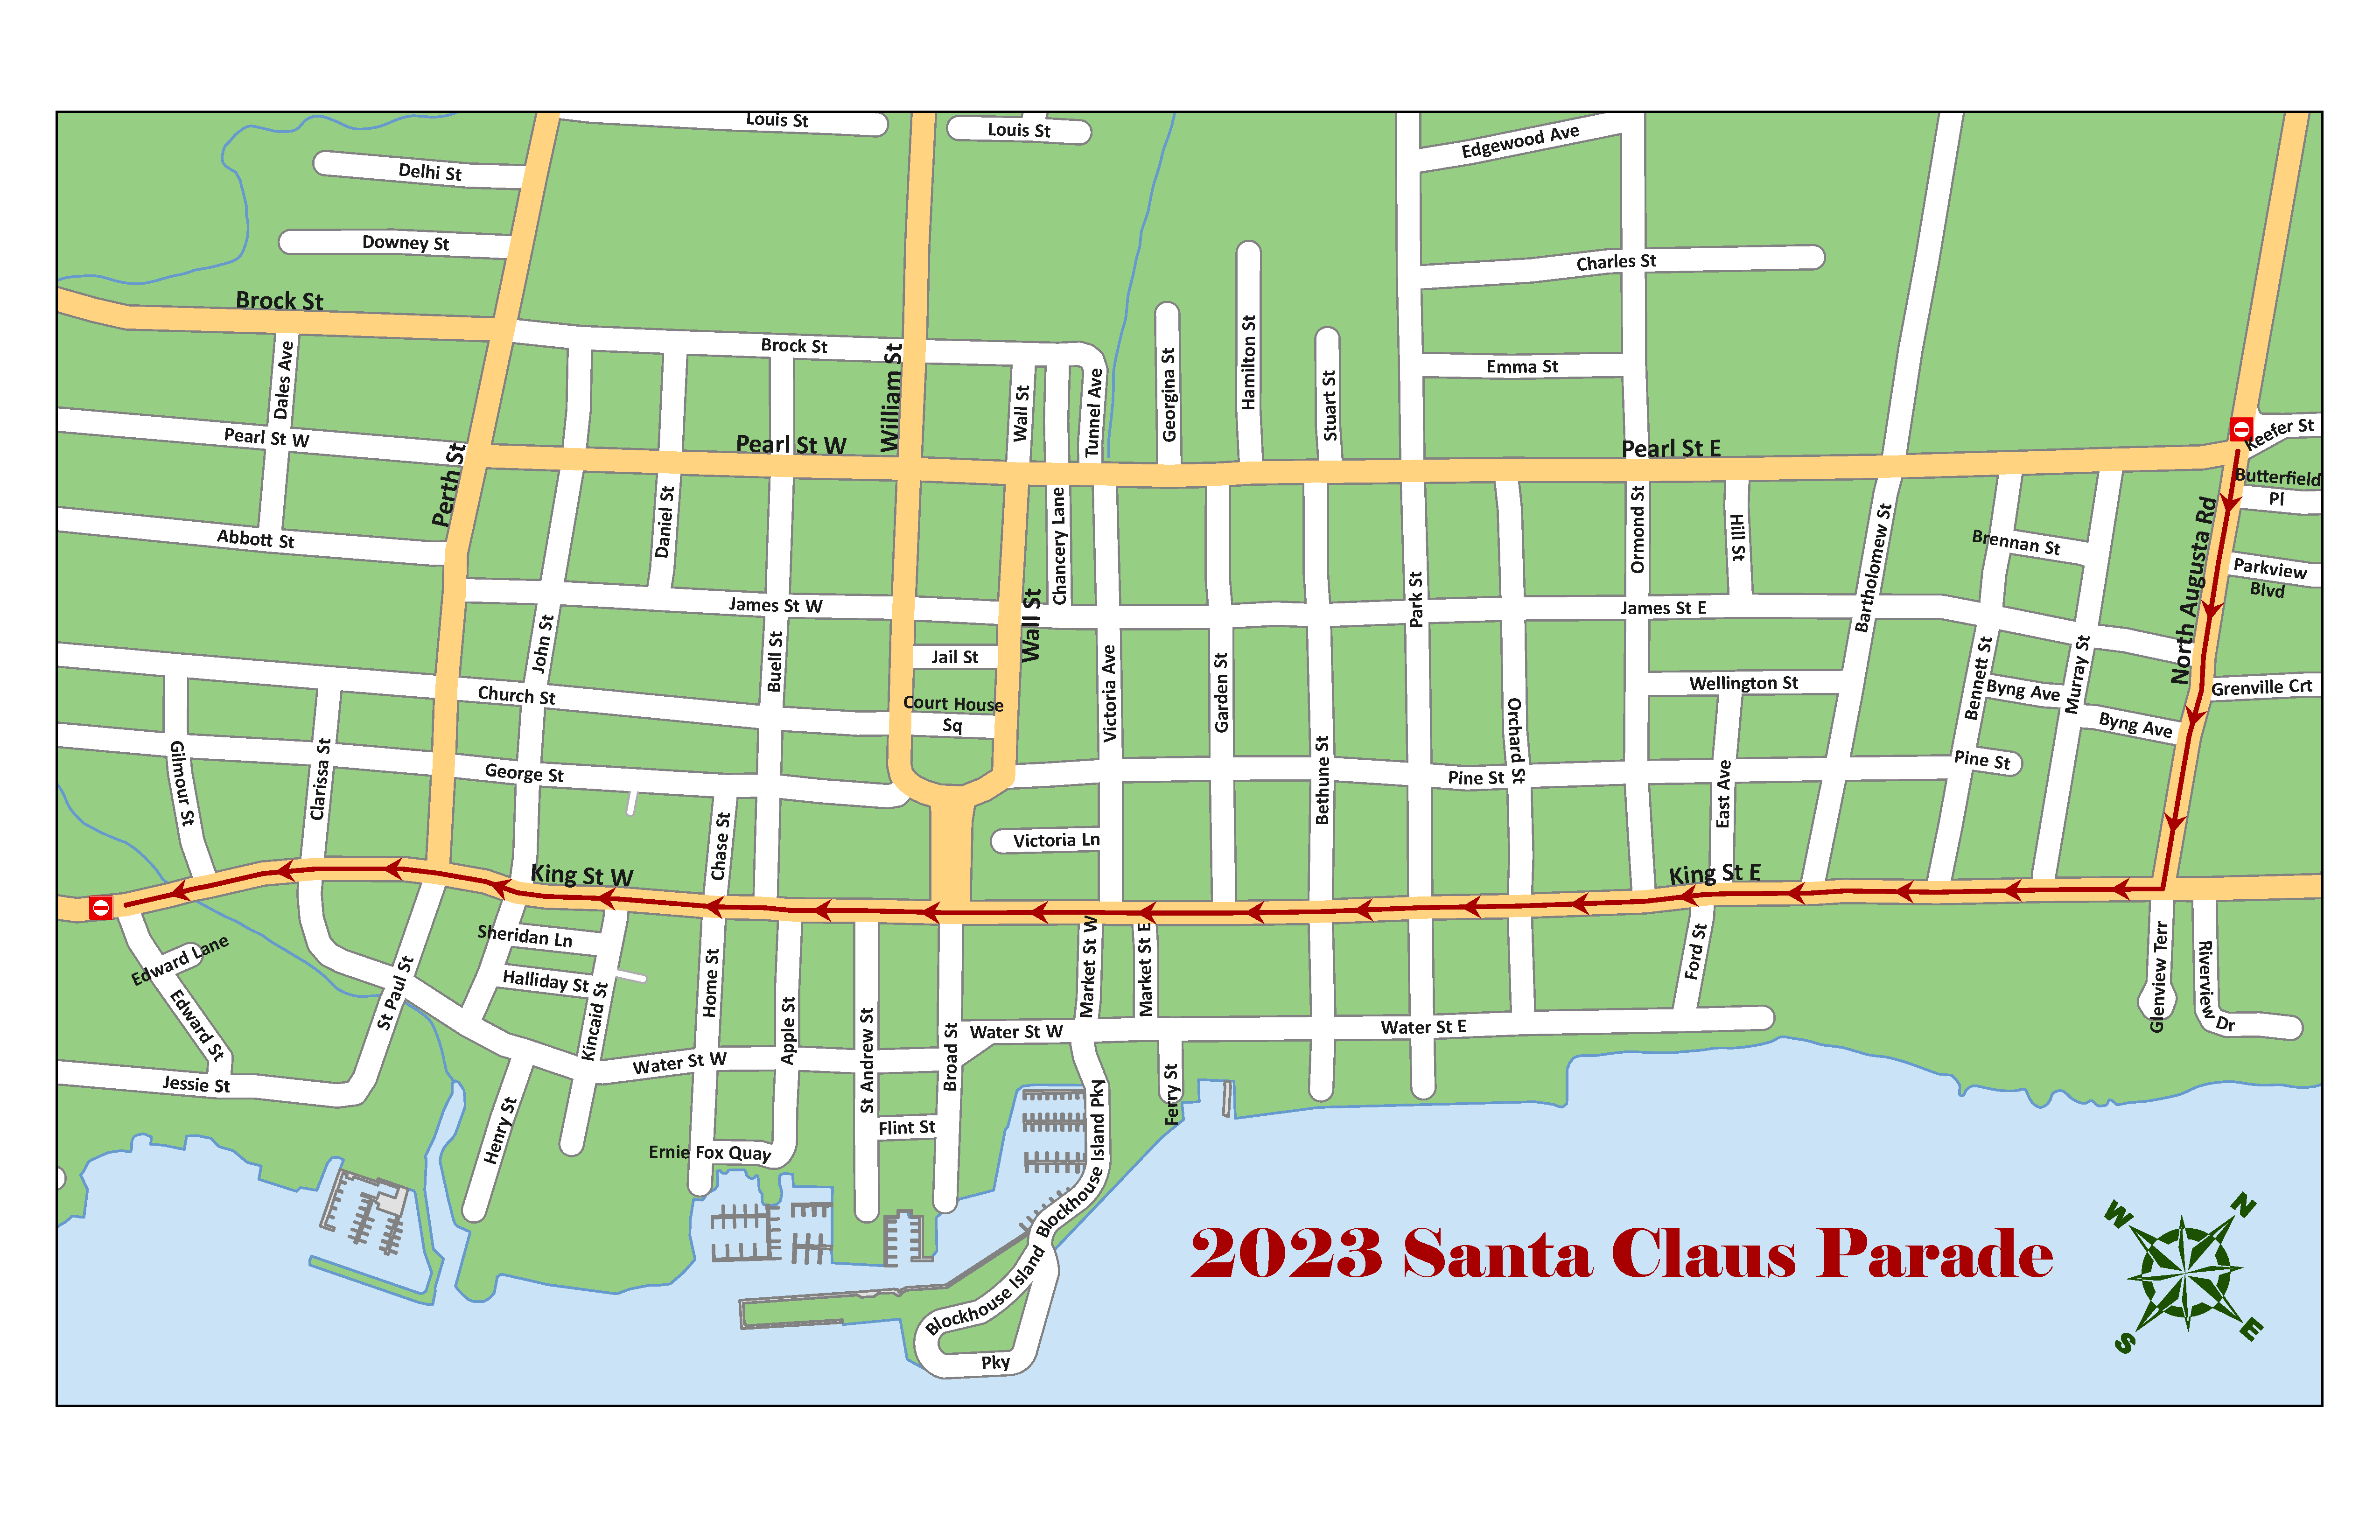 Map of Parade Route